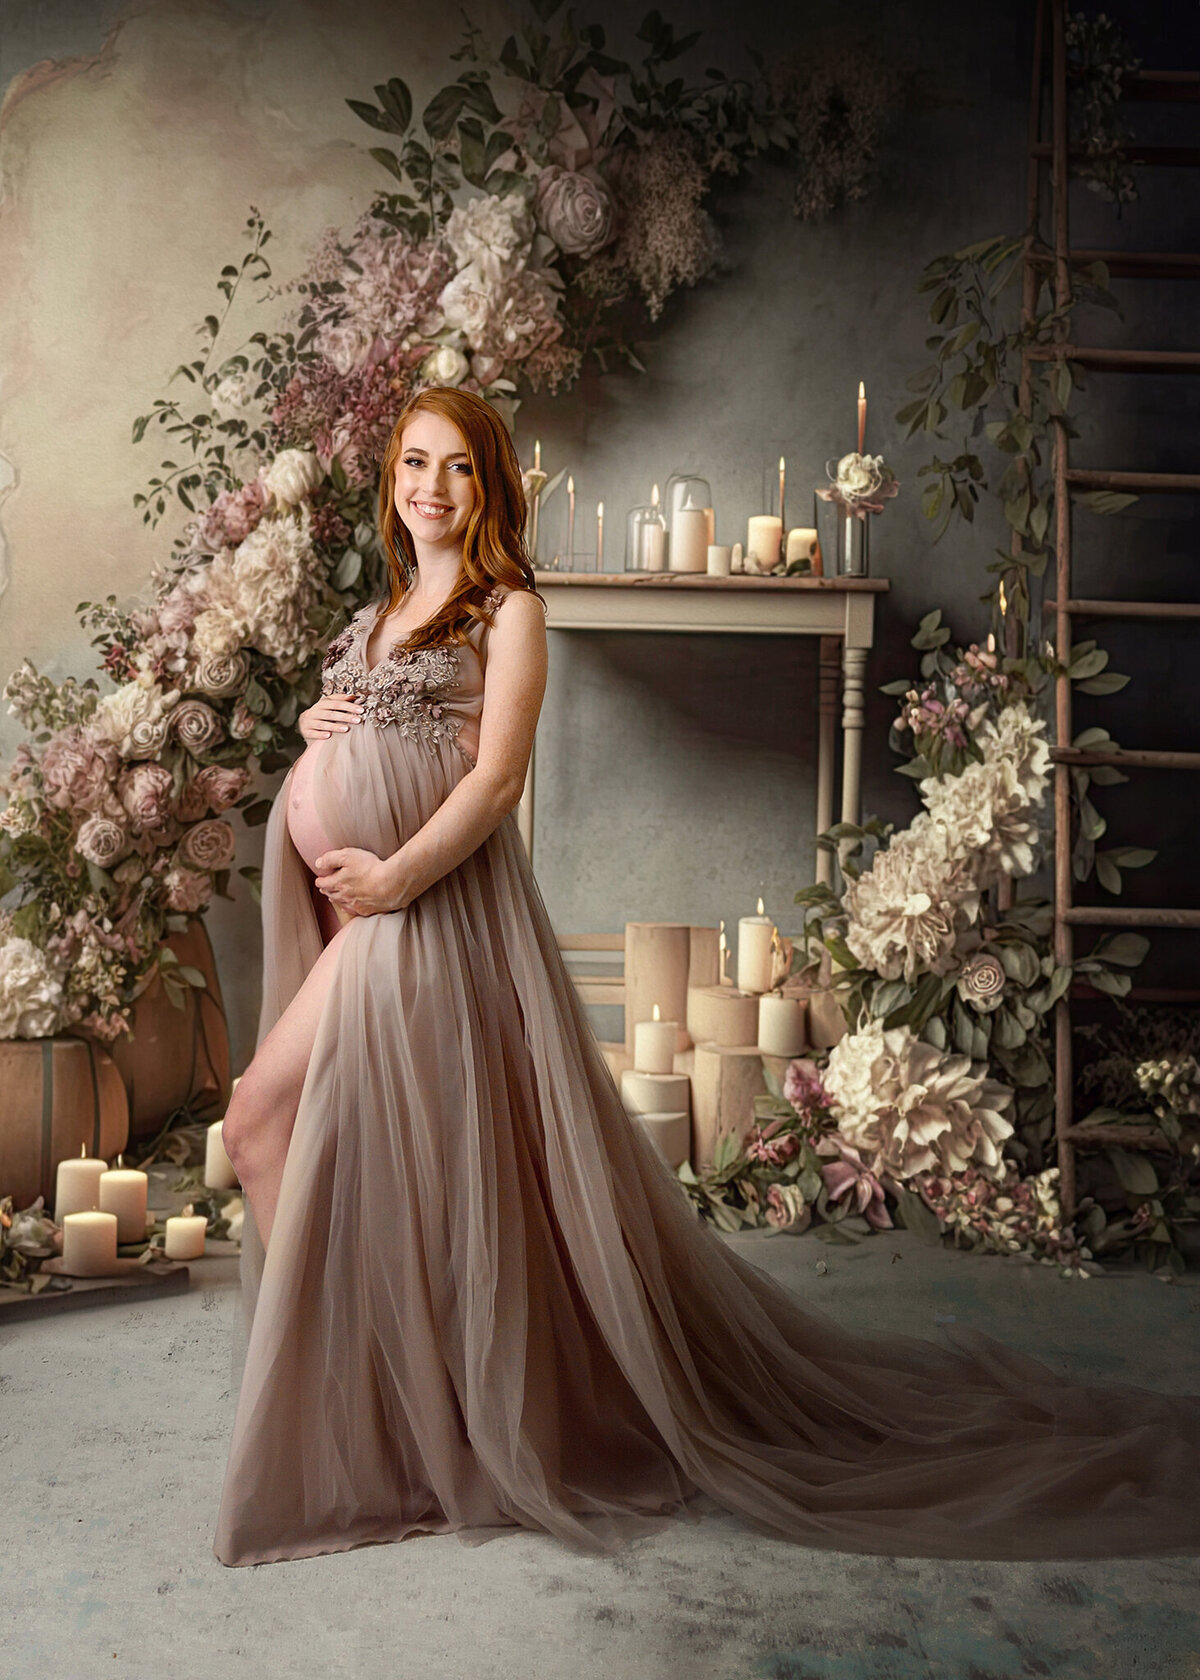 Beautiful red haired pregnant woman in a dark tan neutral gown standing in room with fireplace, wooden ladder, candles and floral arrangements